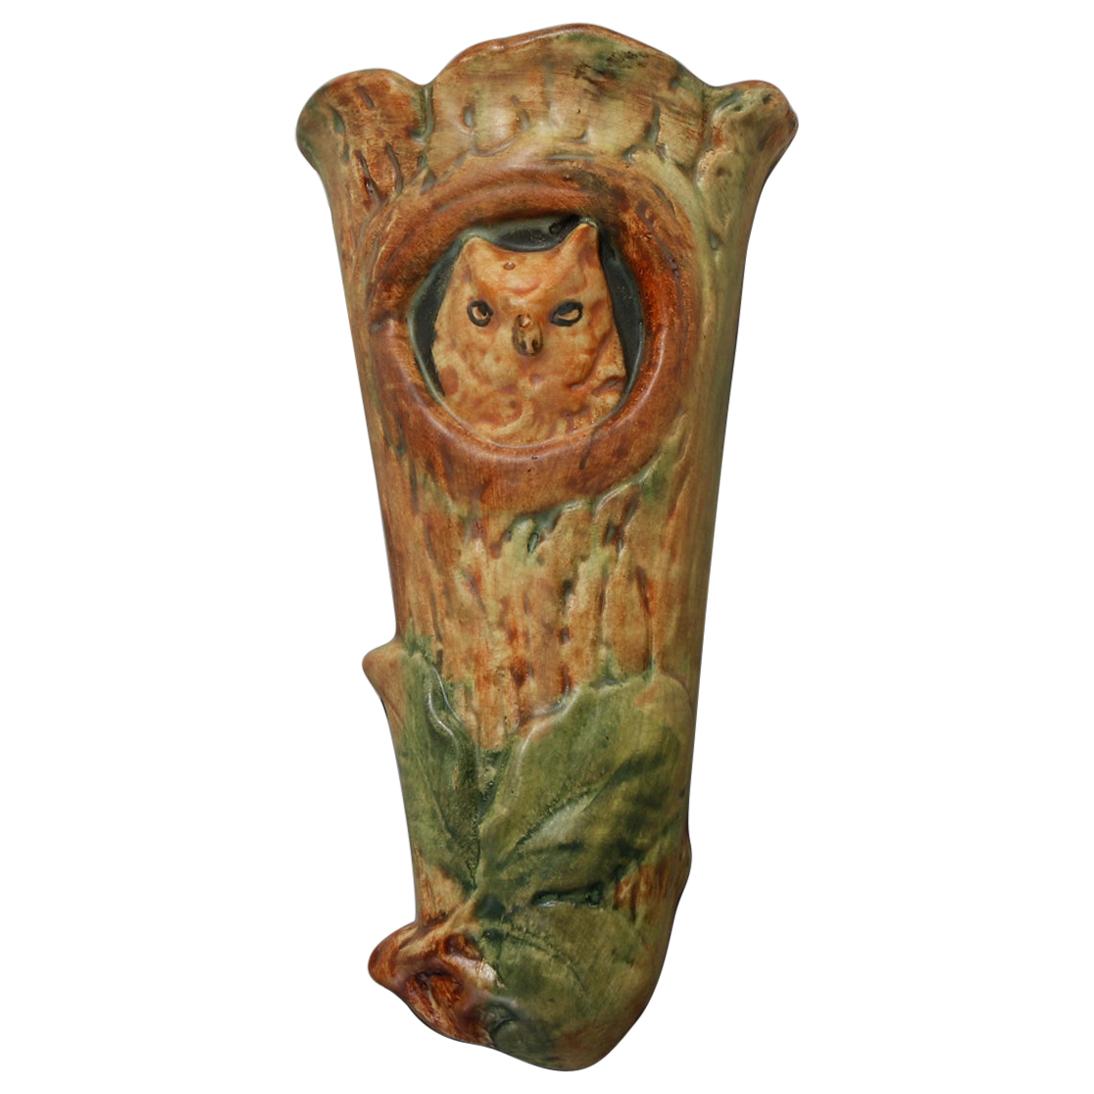 Vintage Weller Woodcraft Art Pottery Wall Pocket with Owl, circa 1930